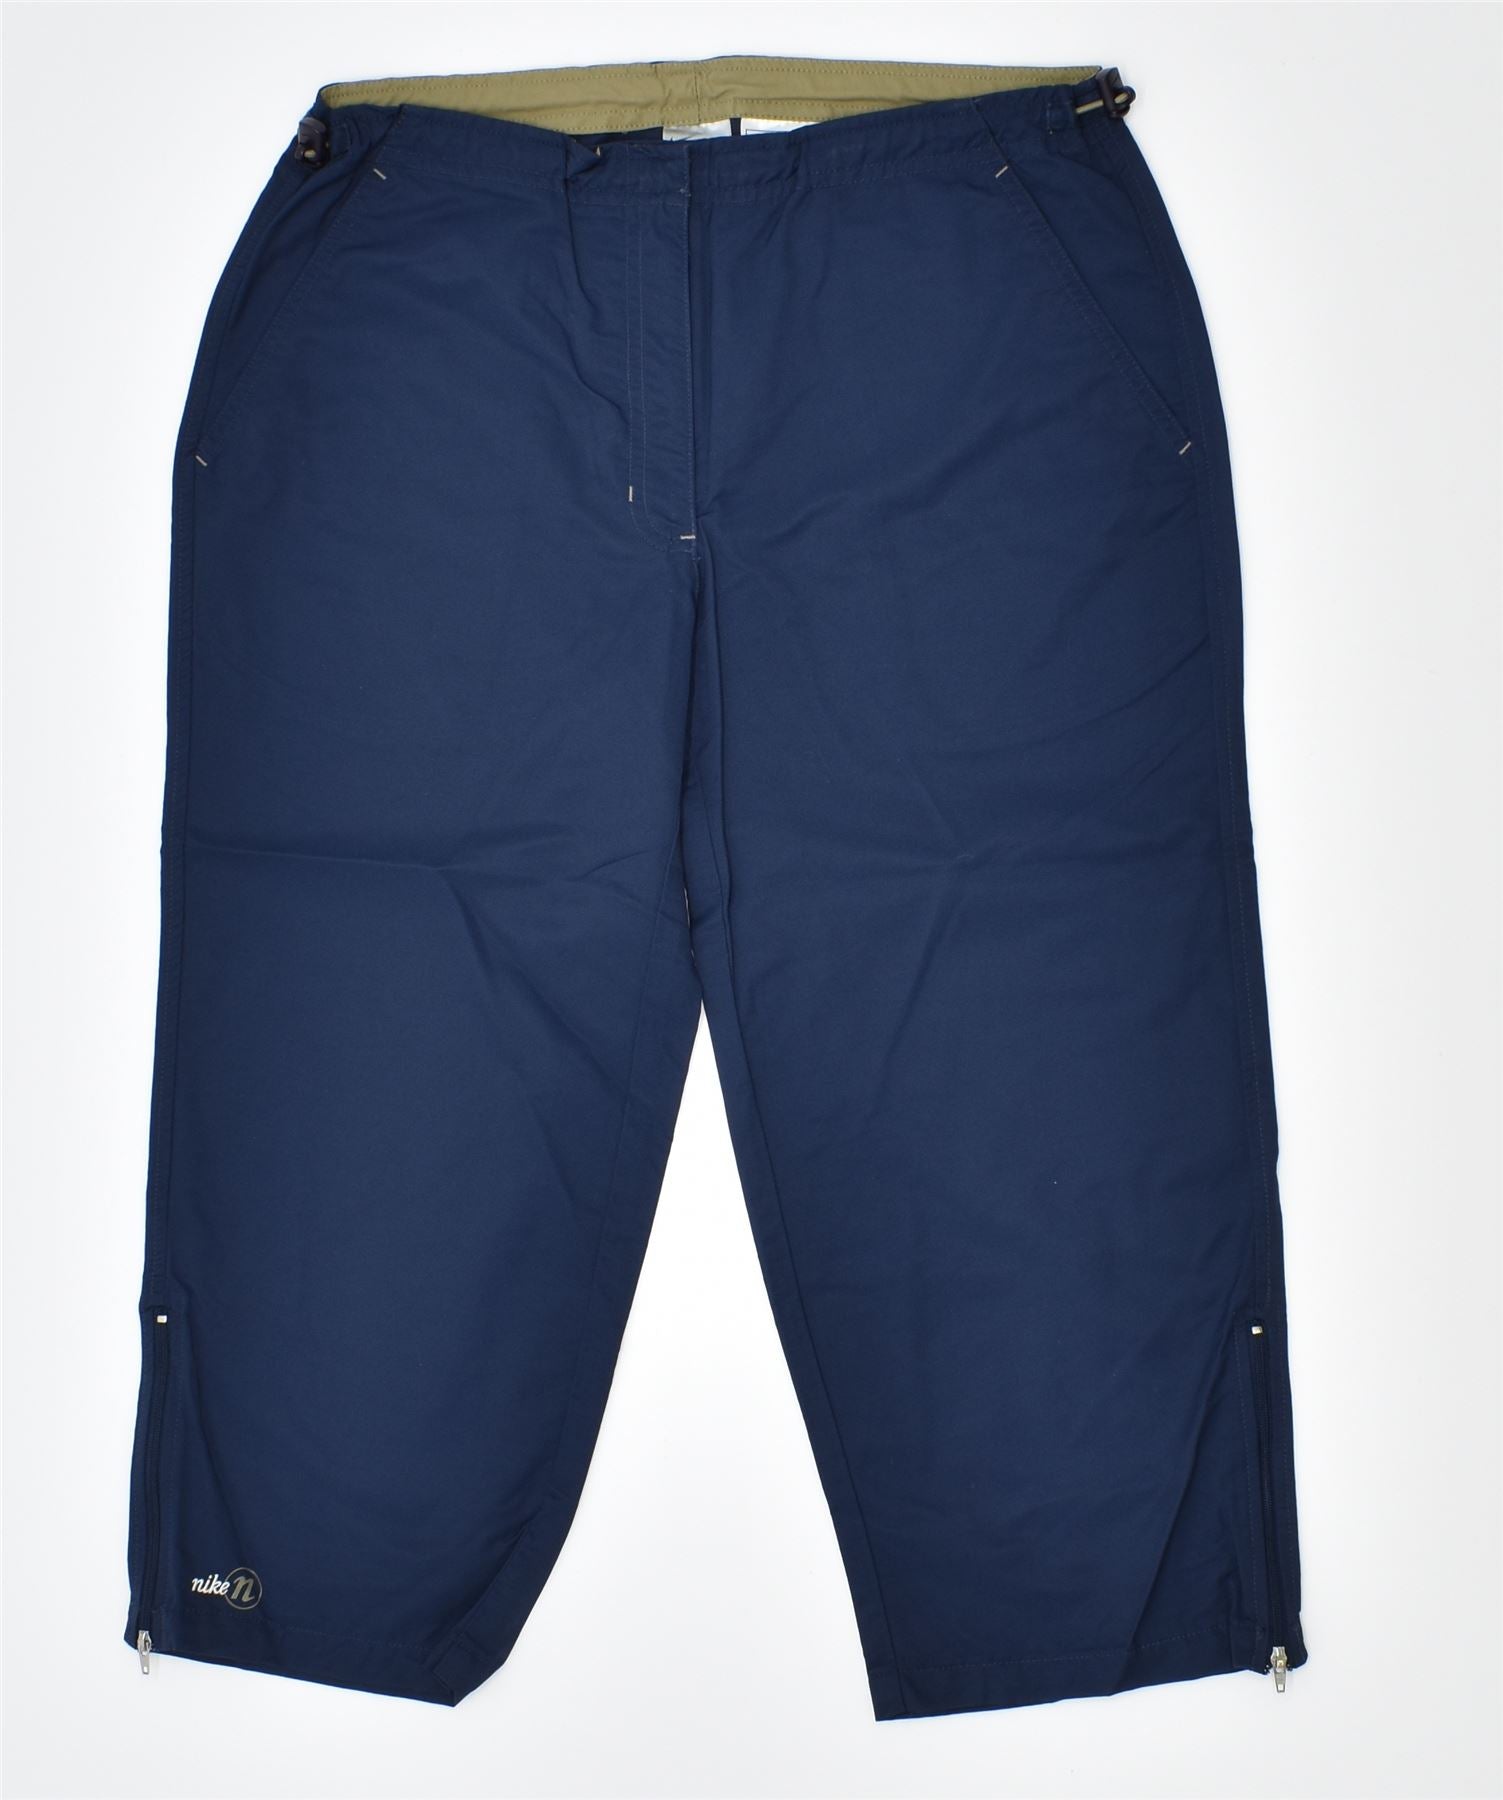 NIKE Girls Capri Trousers 8-9 Years Medium Navy Blue Cotton Sports, Vintage & Second-Hand Clothing Online